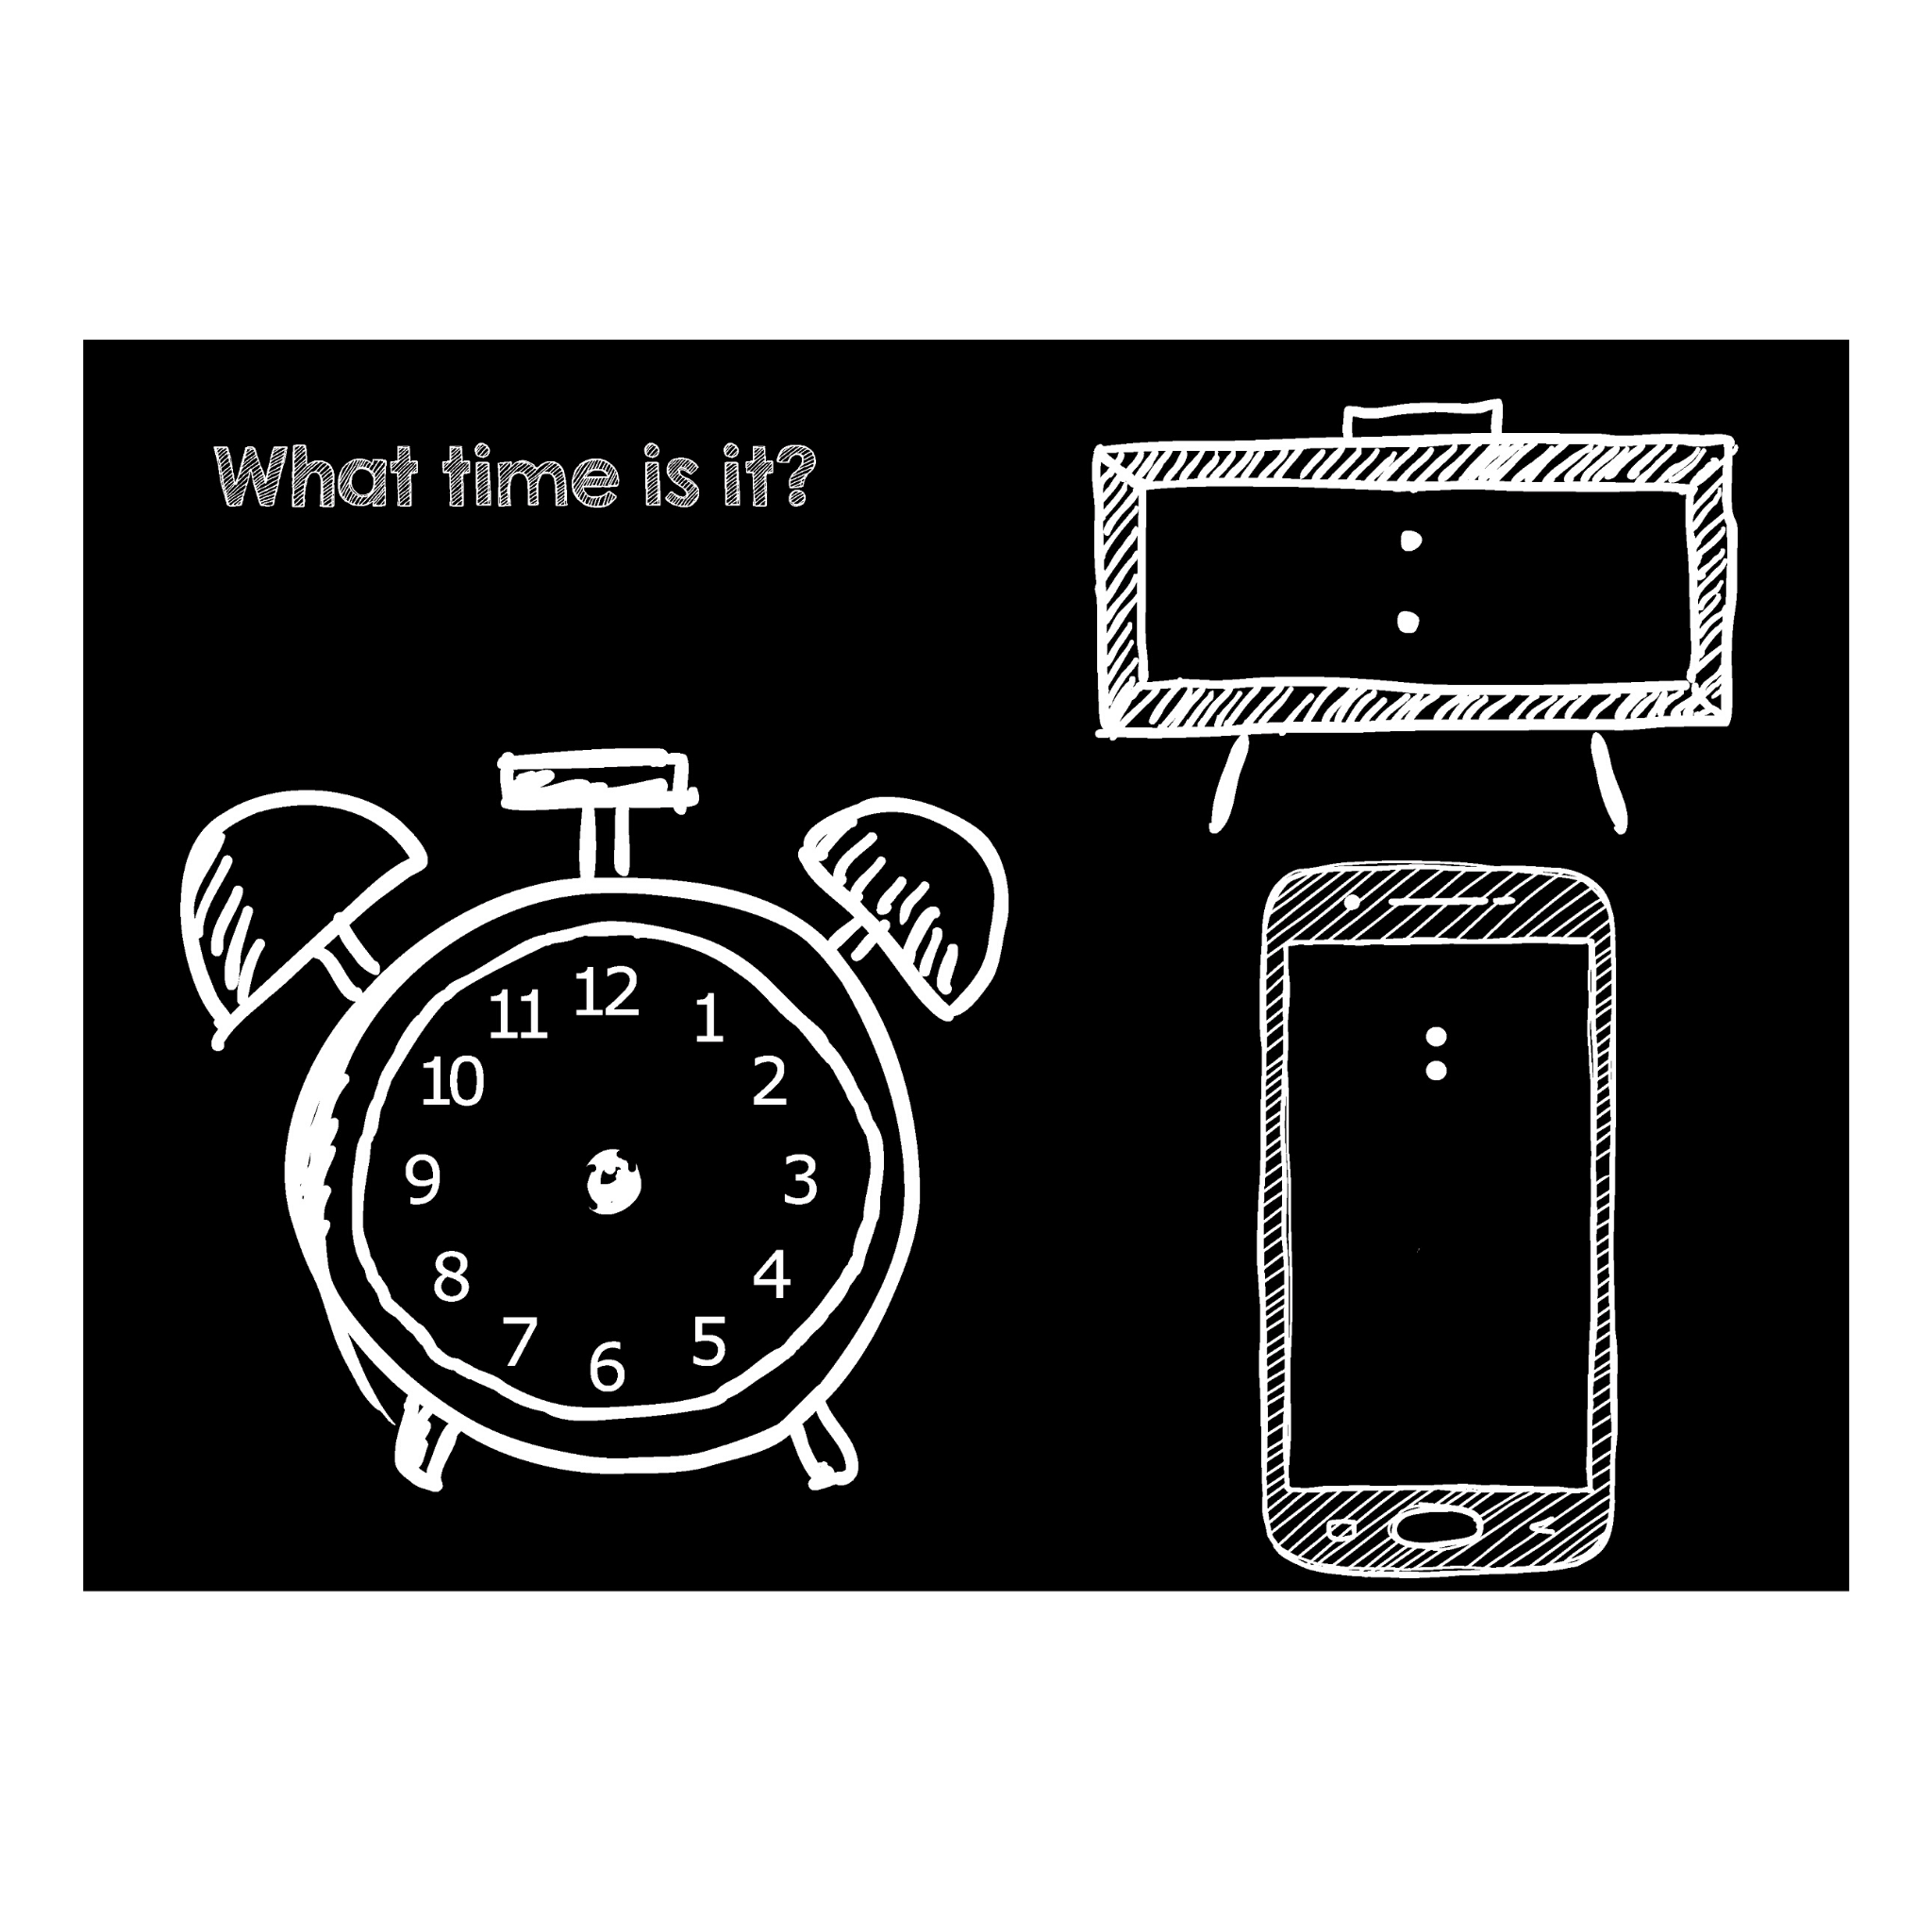 Chalkboard Placemat - "What time is it?"